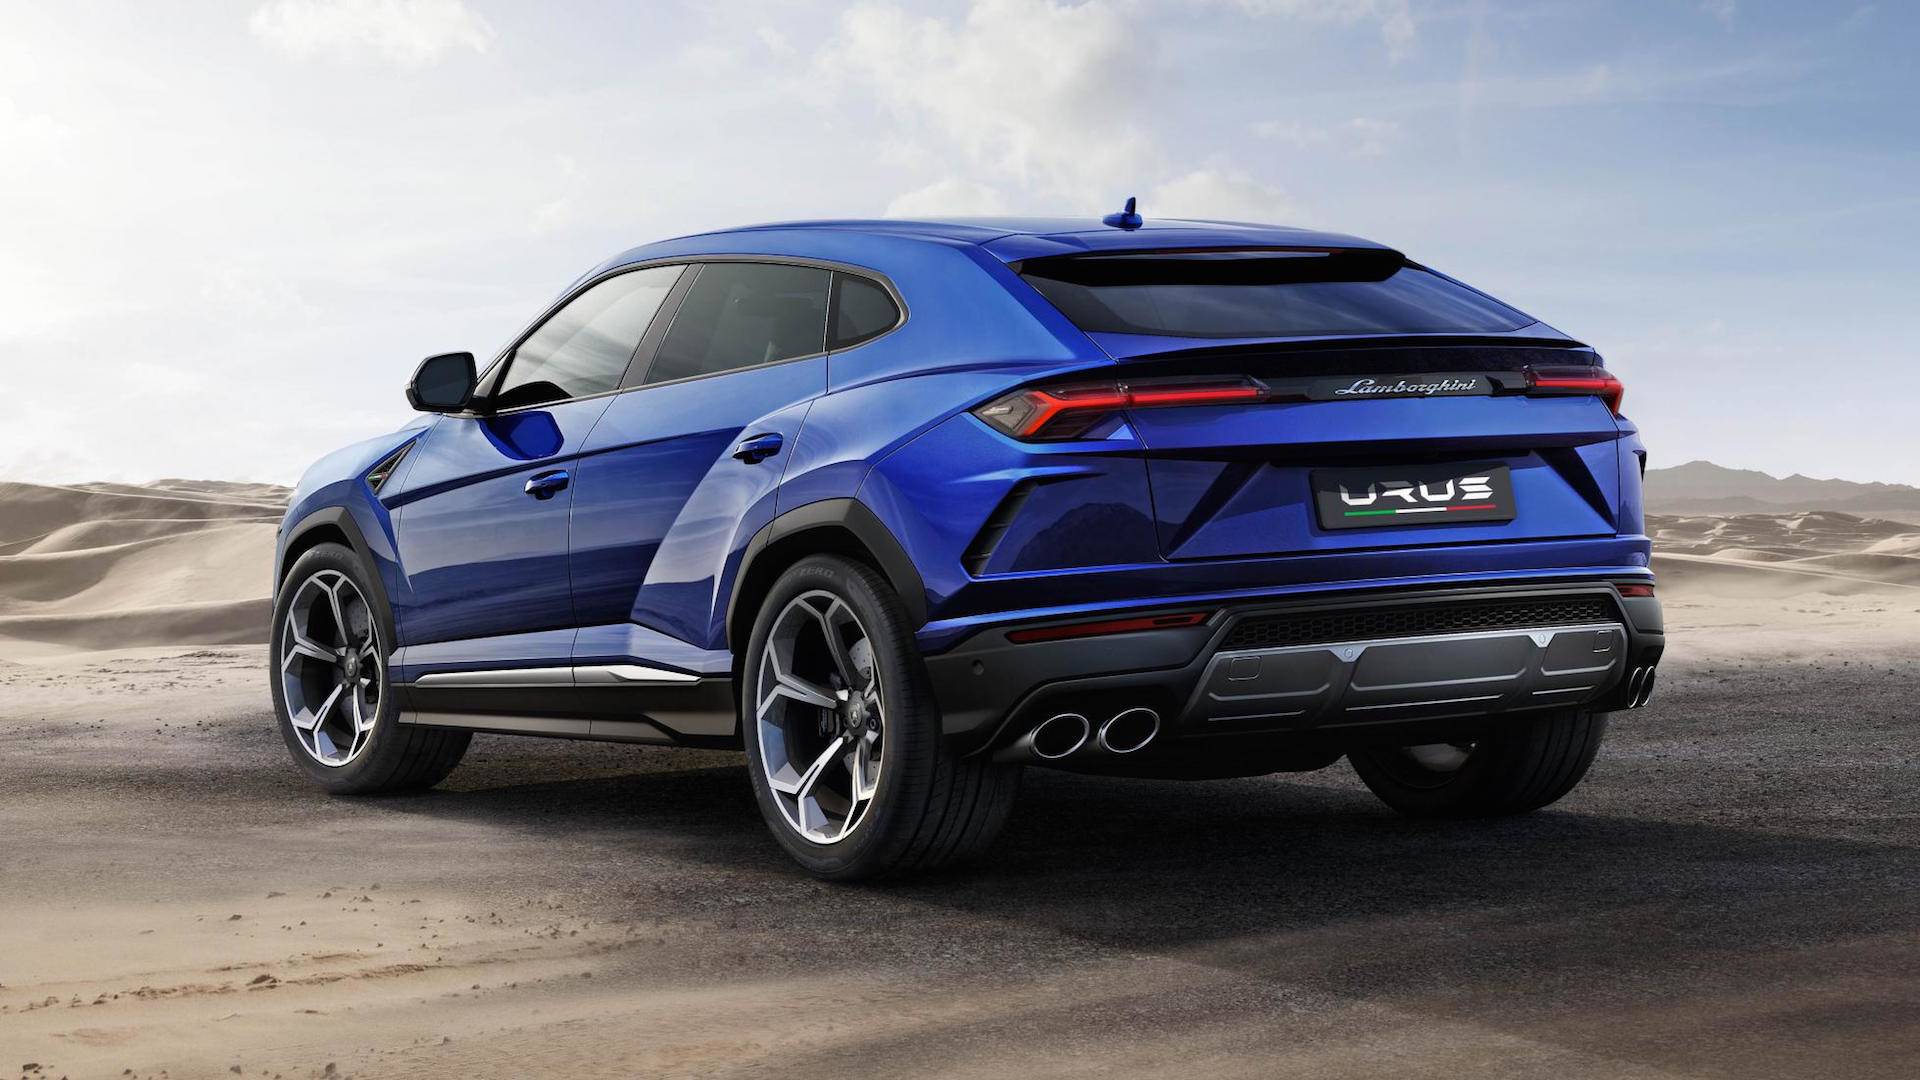 Urus Is The World's Fastest SUV, Nurburgring Record Teased